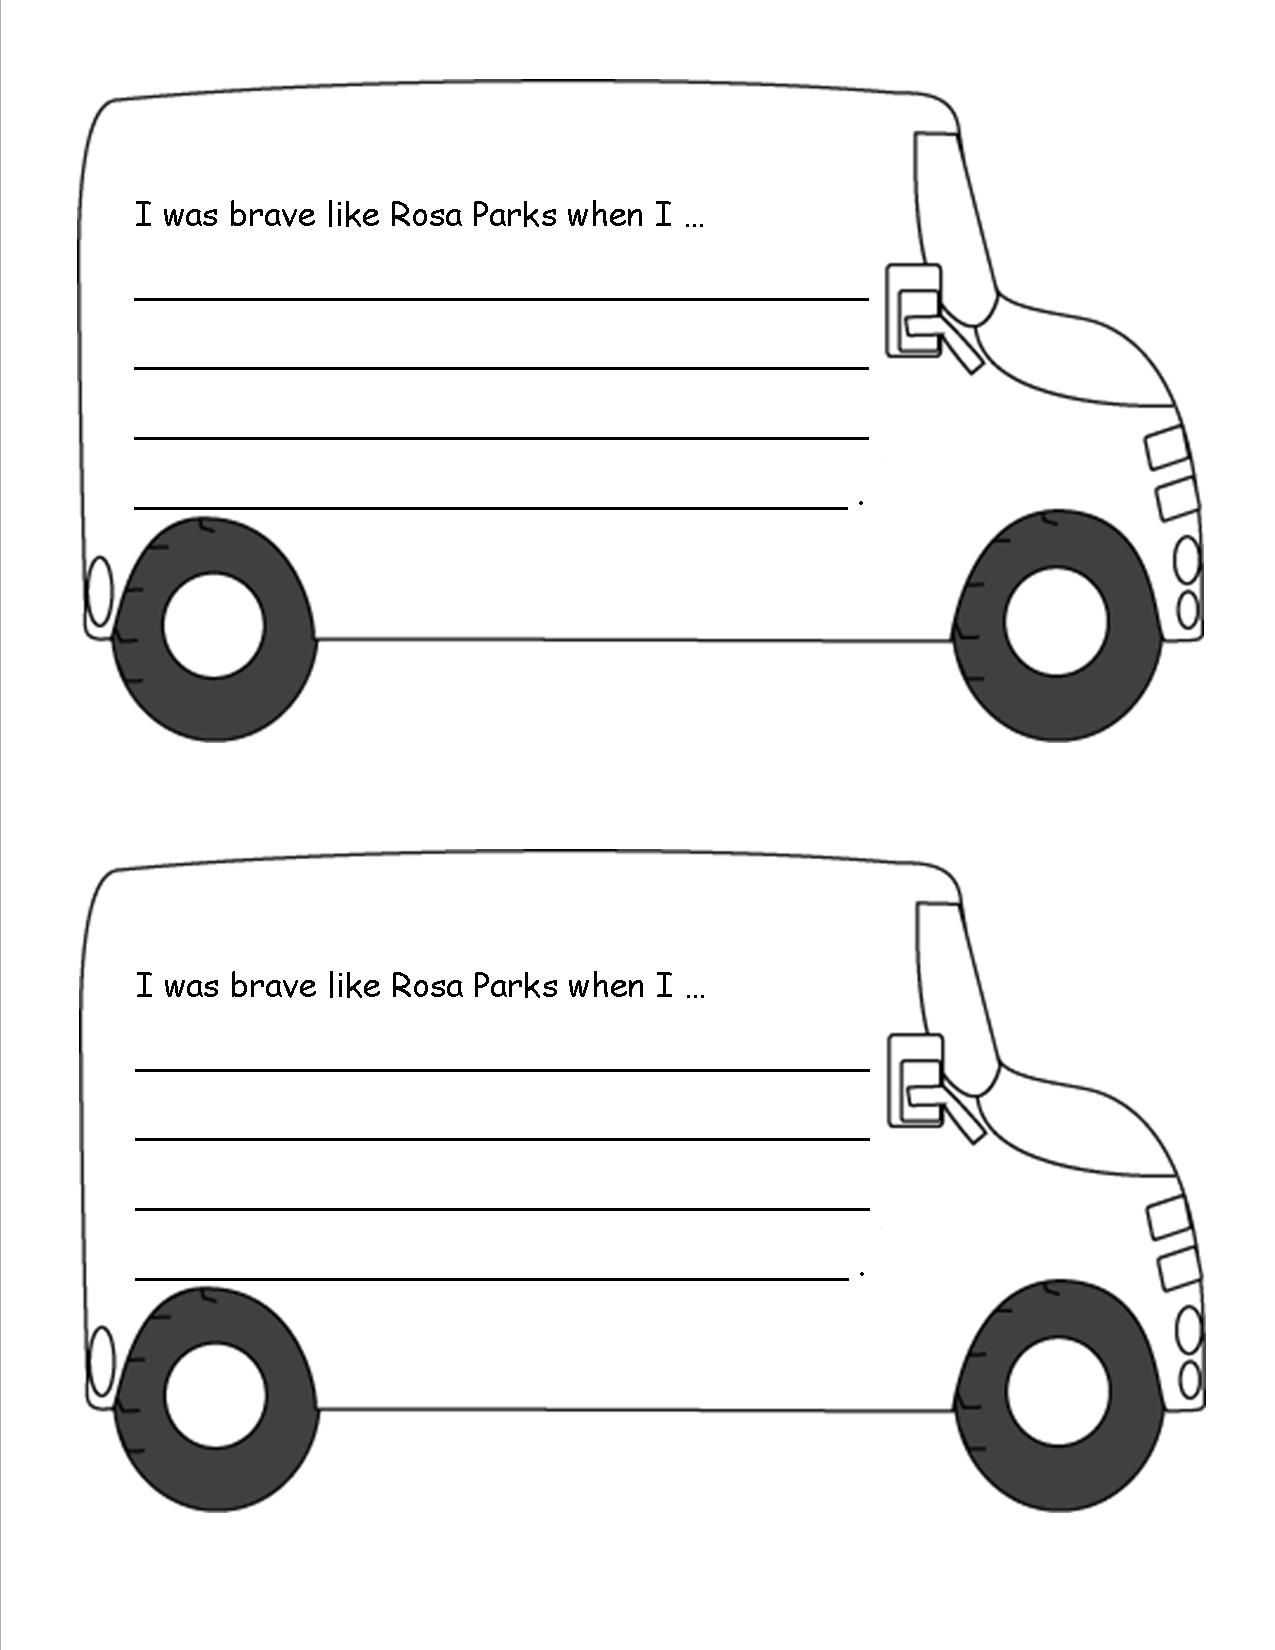 Reading Like A Historian Worksheet Answers Also Rosa Parks Worksheet This Activity is Great for Students Learning